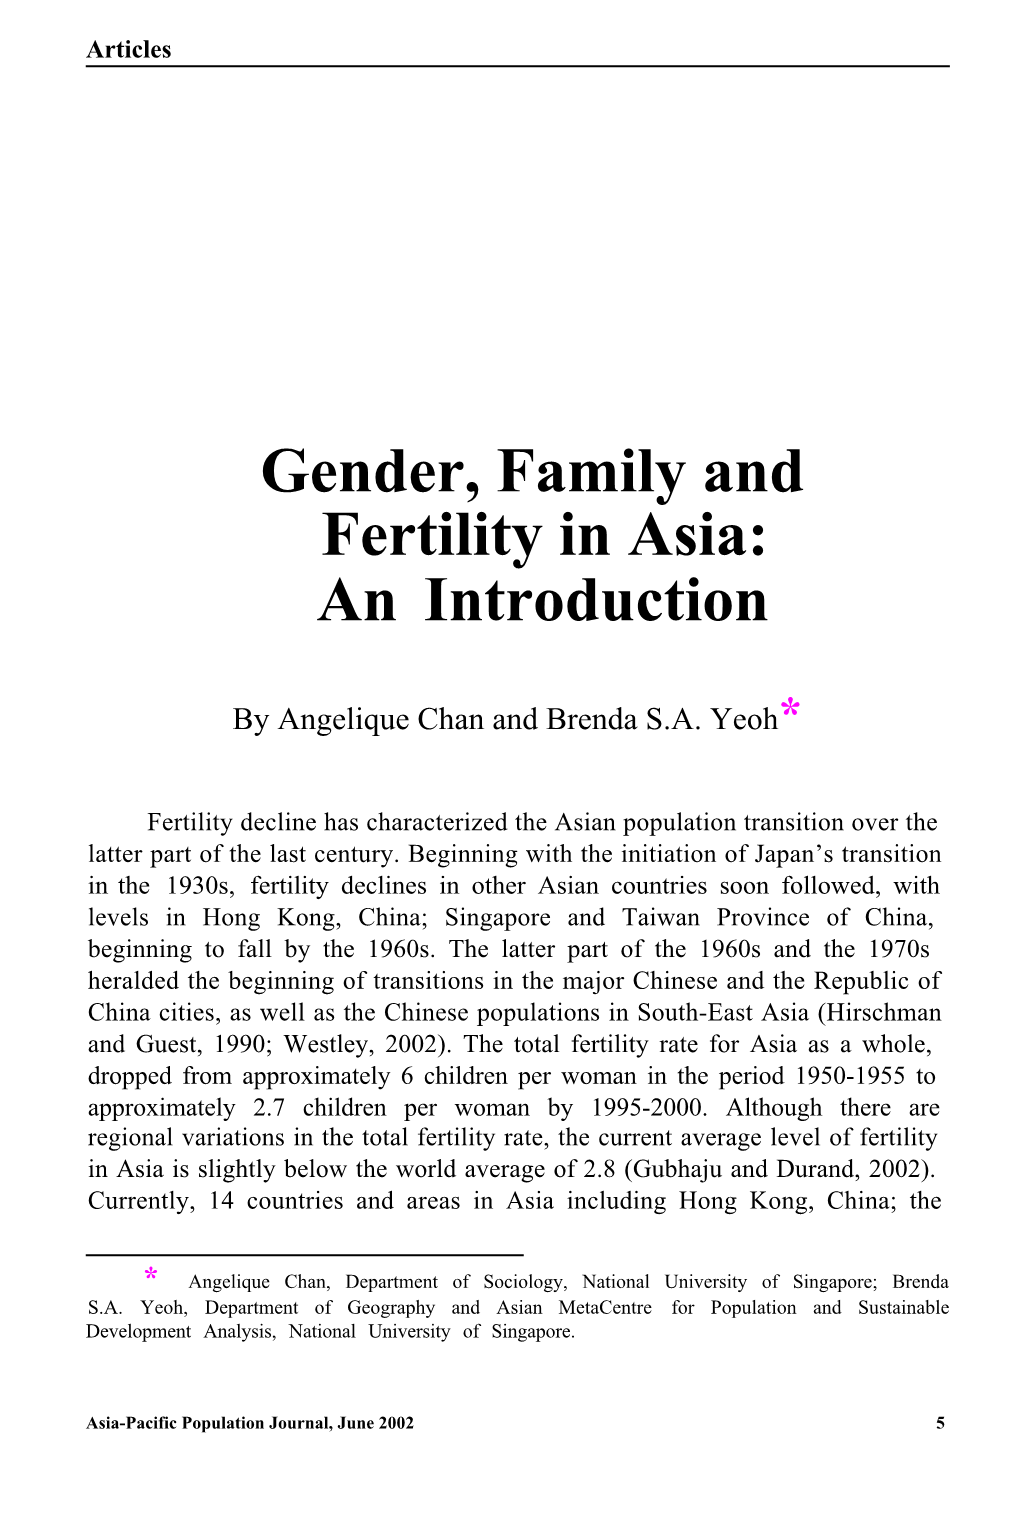 Gender, Family and Fertility in Asia: an Introduction